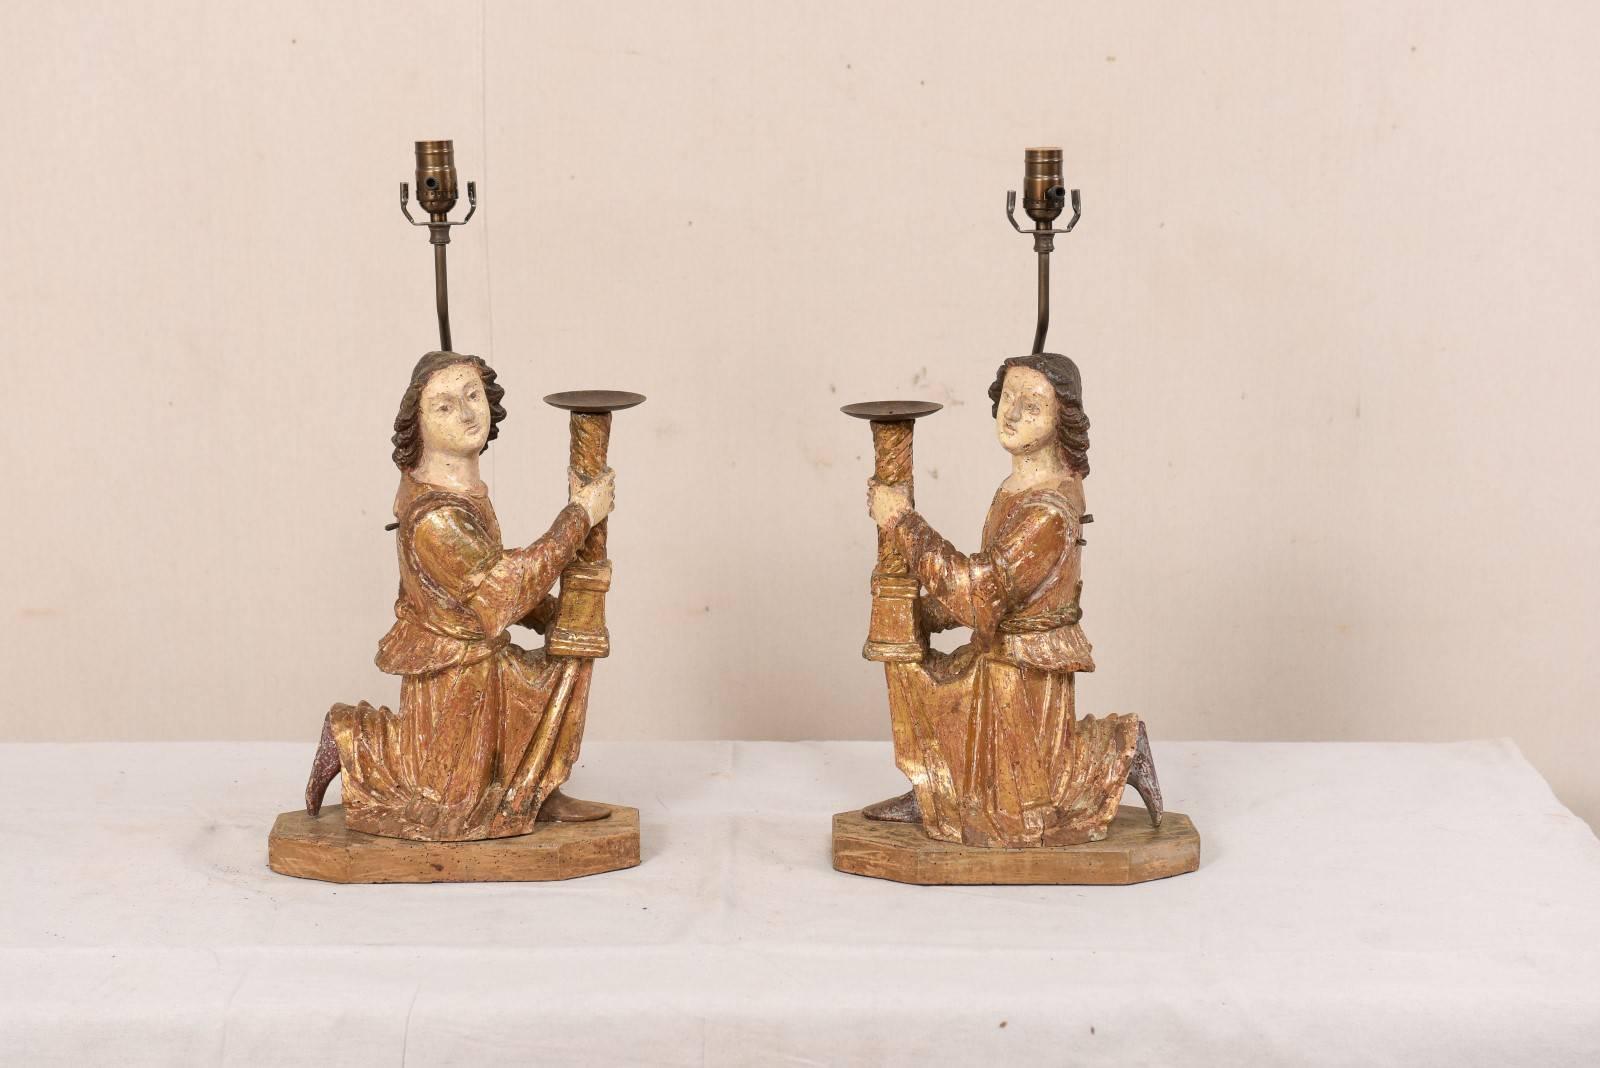 A pair of Italian 18th century figurative hand-carved candlestick table lamps. This exquisite pair of table lamps have been fashioned from a pair of 18th century hand-carved figurines from Sienna, Italy. The alter figures, with their gilded robes,